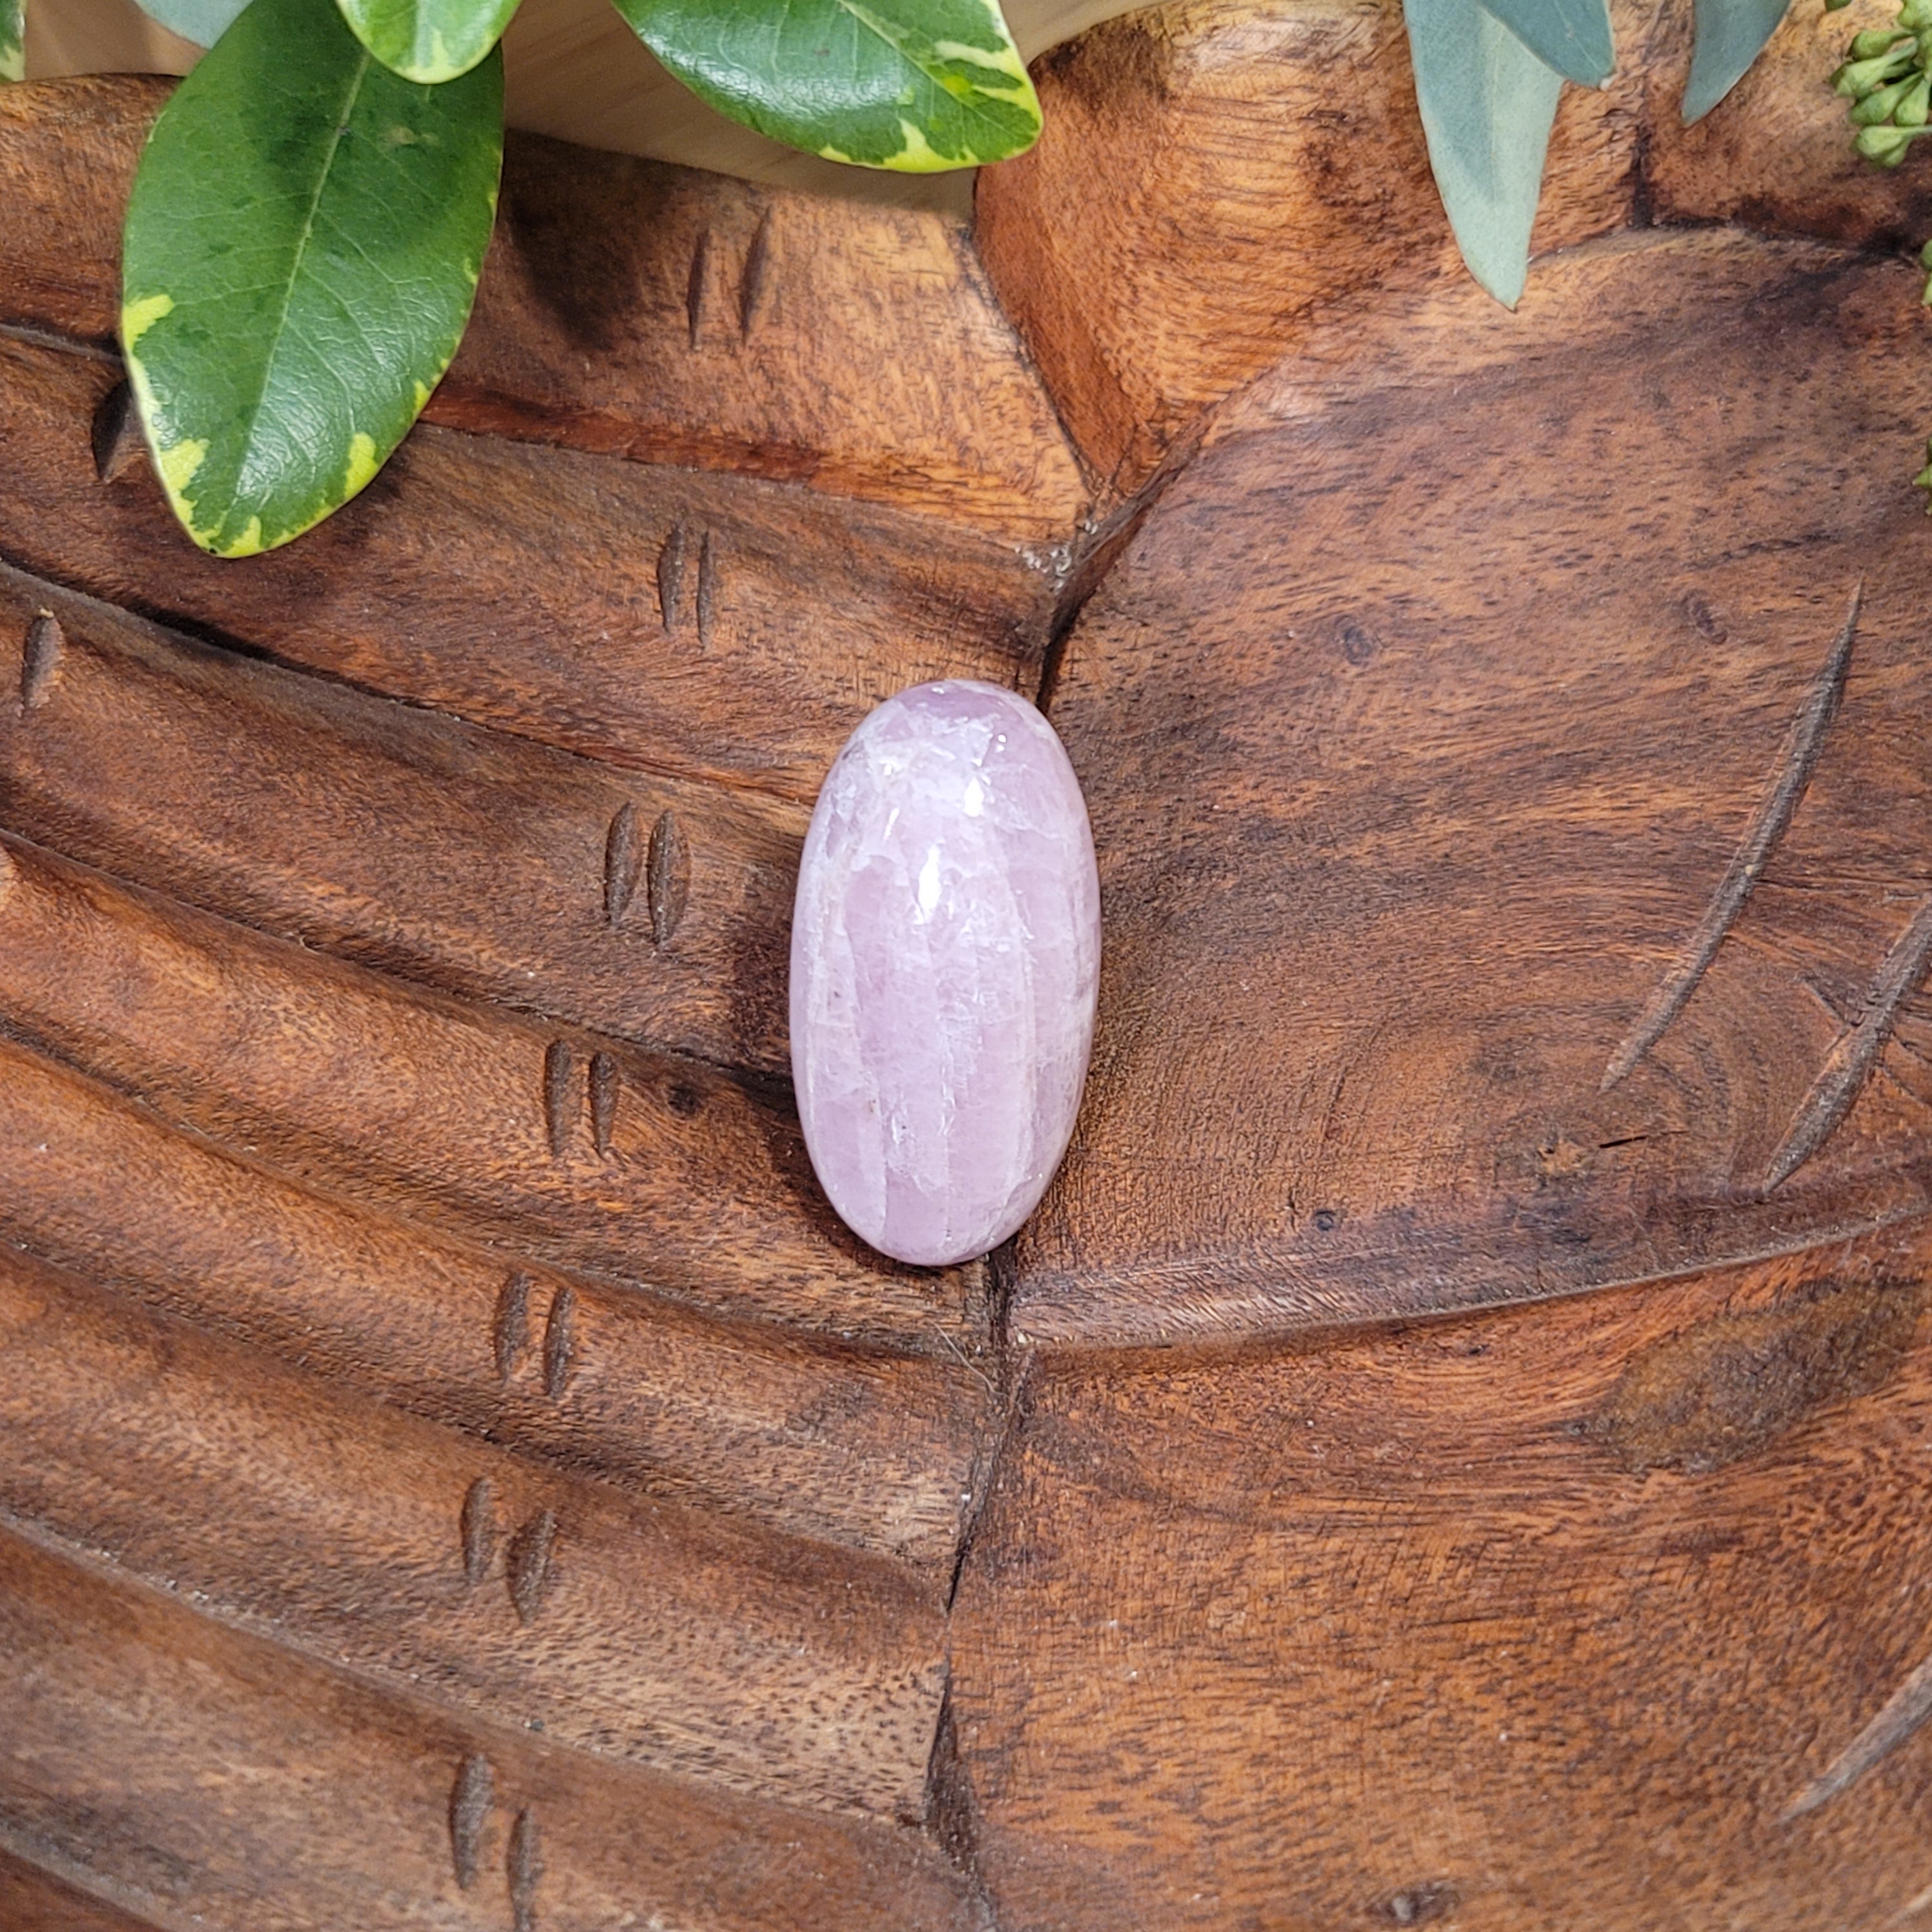 Kunzite Shiva for Emotional, Family Healing and Opening Your Heart to Love